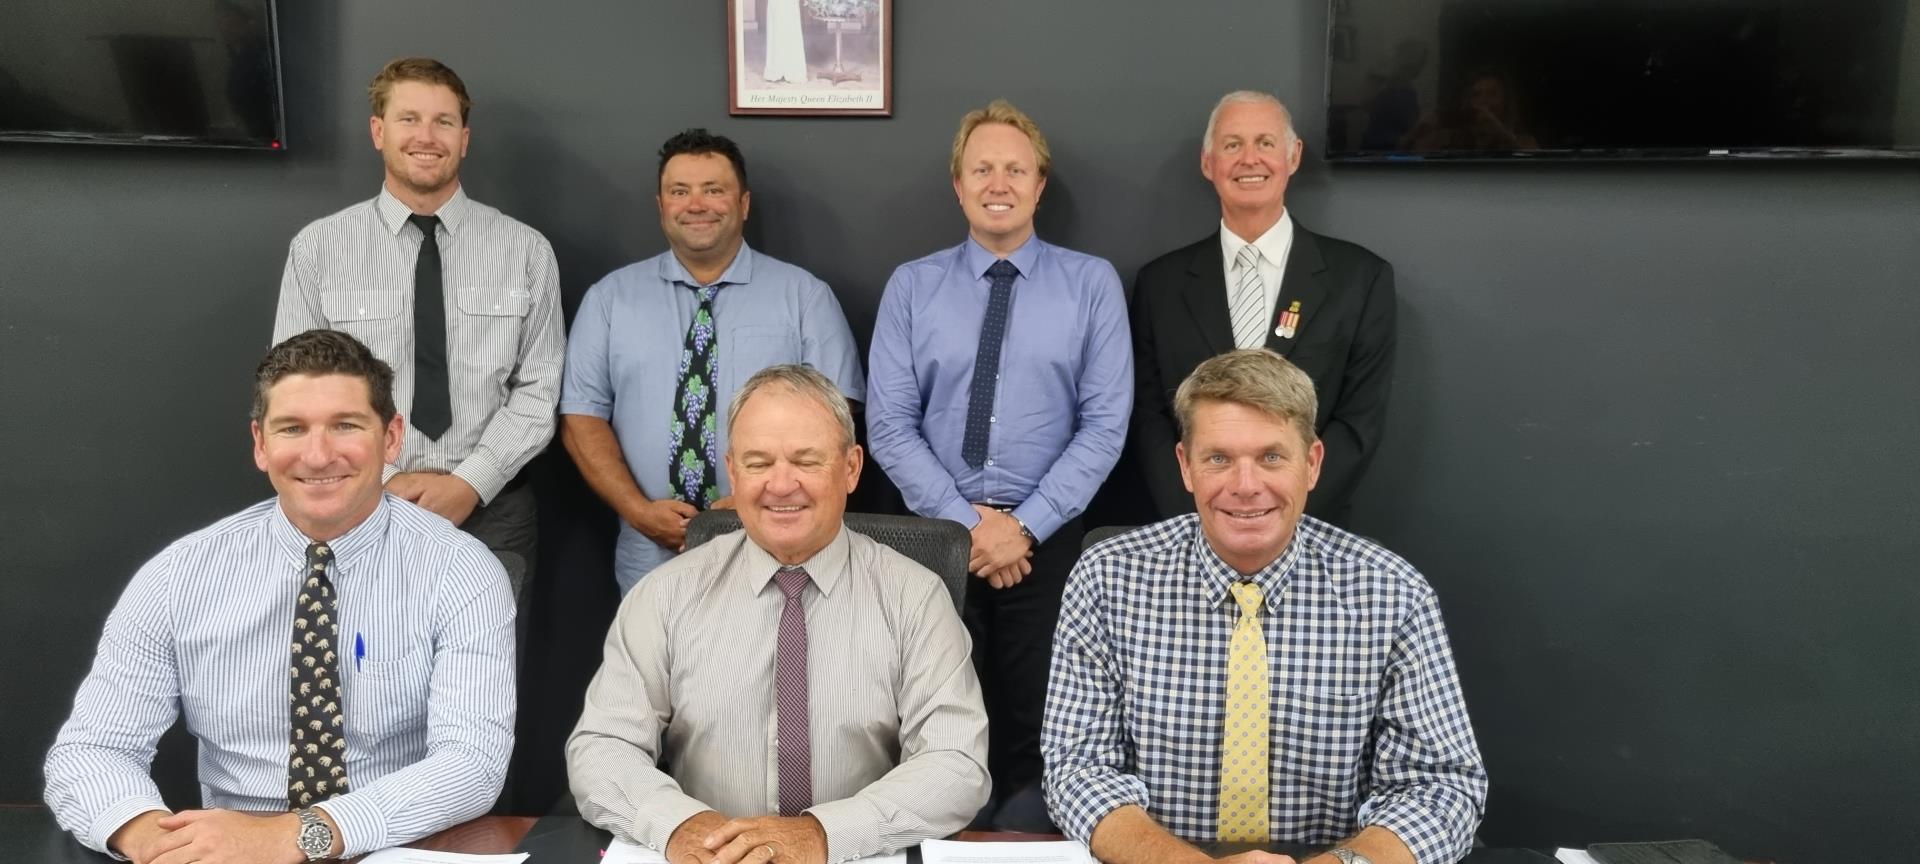 Shire Revenue Strategy adopted to improve Carnarvon’s financial position